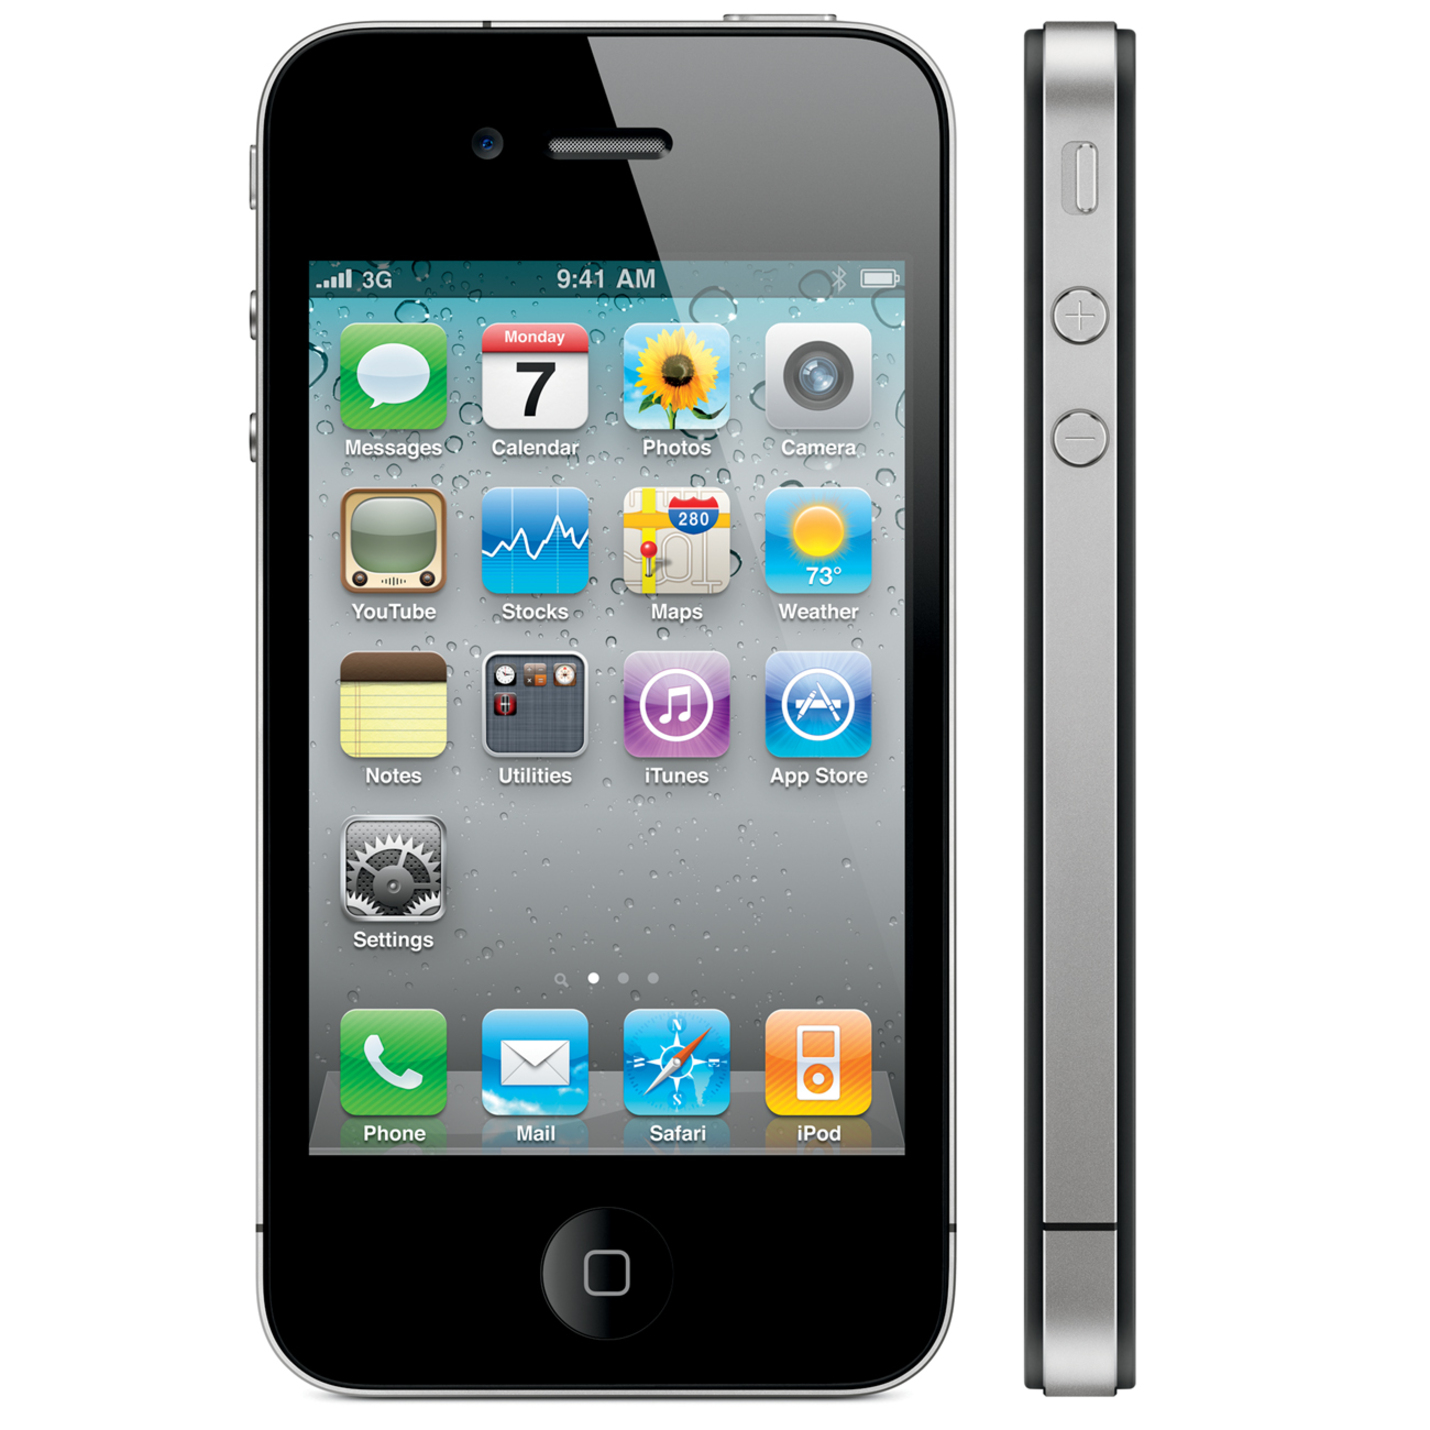 AT&T Apple iPhone 4 Smartphone, 16GB, Black - image 1 of 5